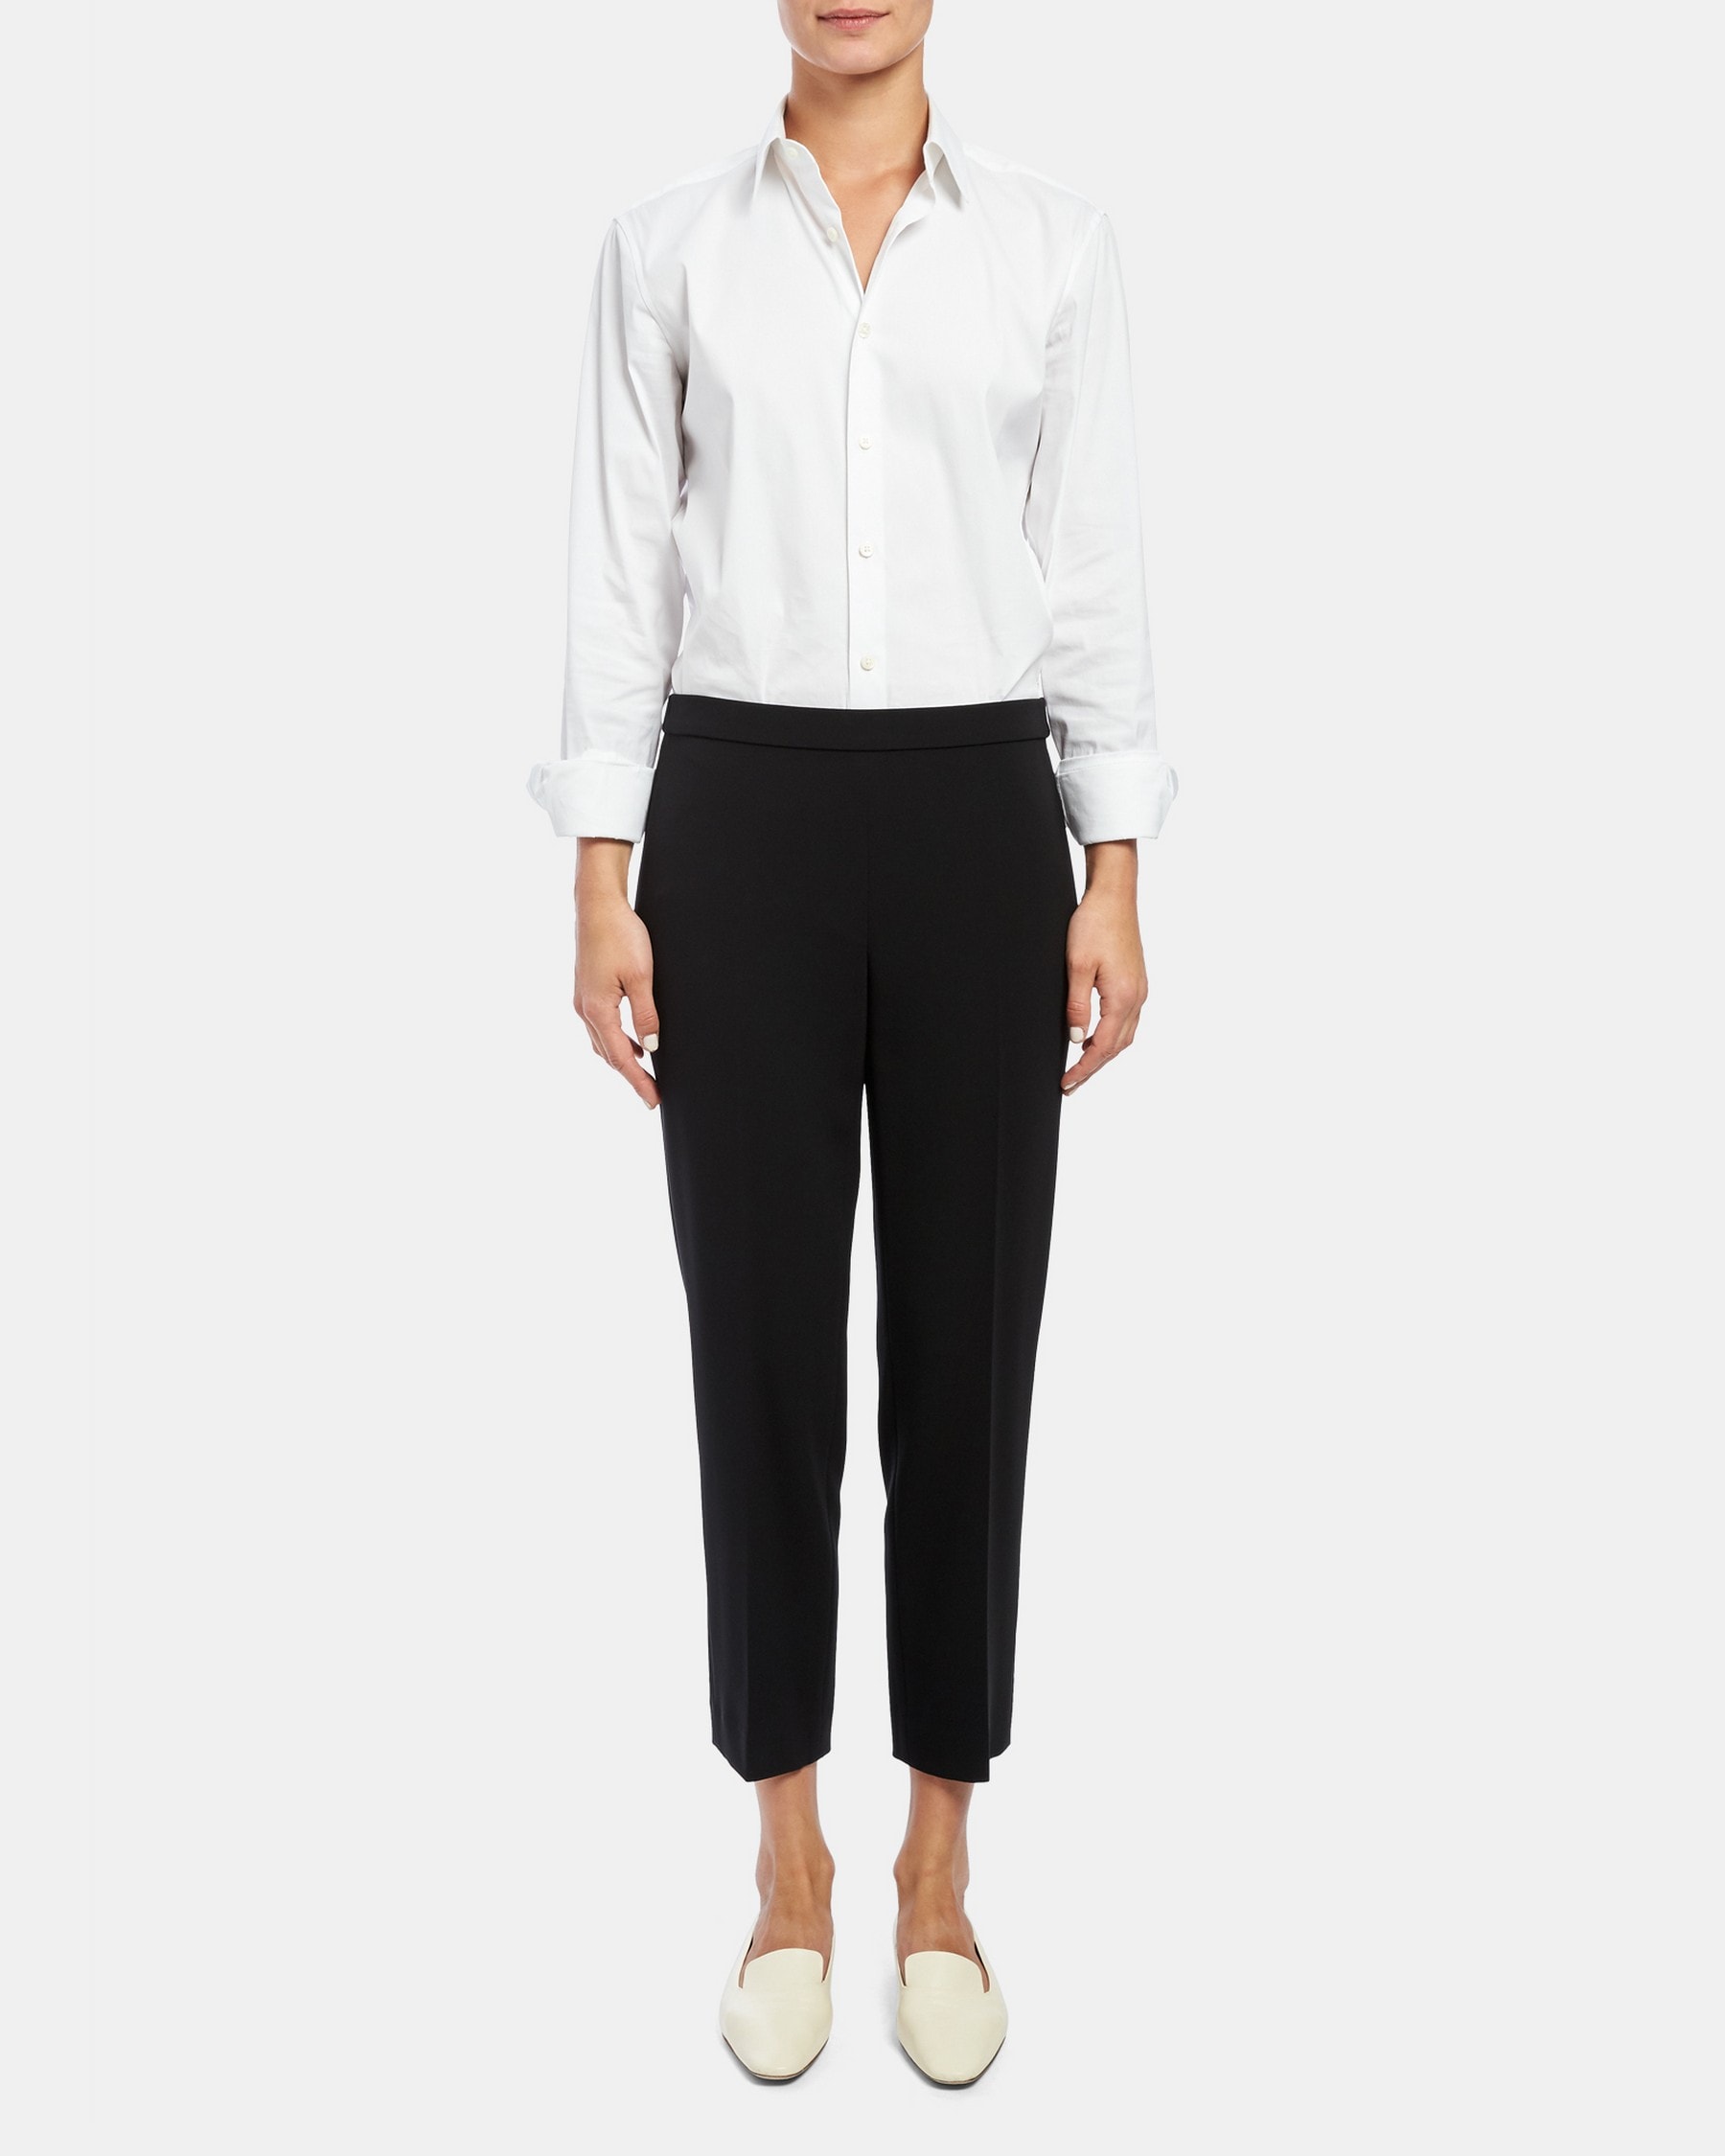 Basic Pull-On Pant in Crepe